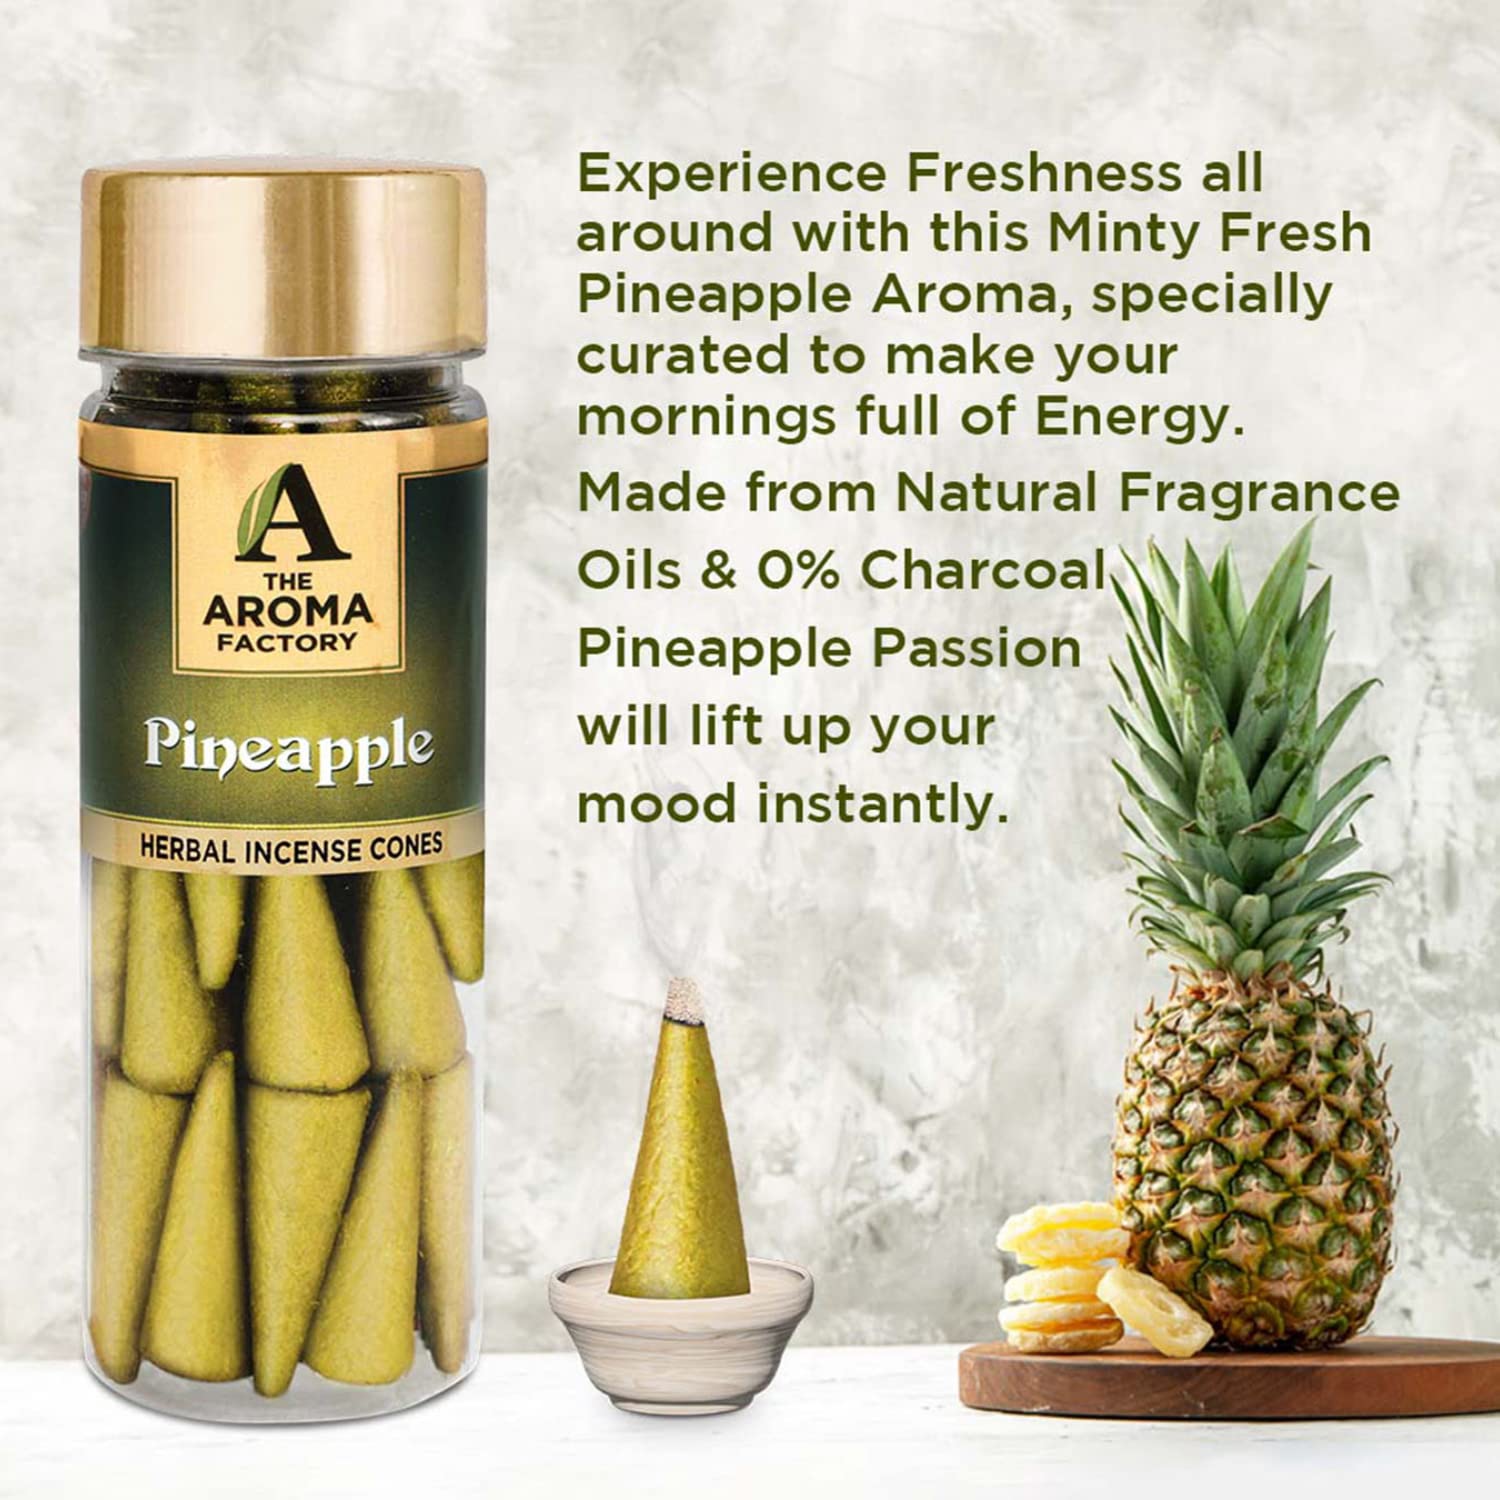 The Aroma Factory Incense Dhoop Cone, Pineapple (100% Herbal & 0% Charcoal) 3 Bottles x 30 Cones